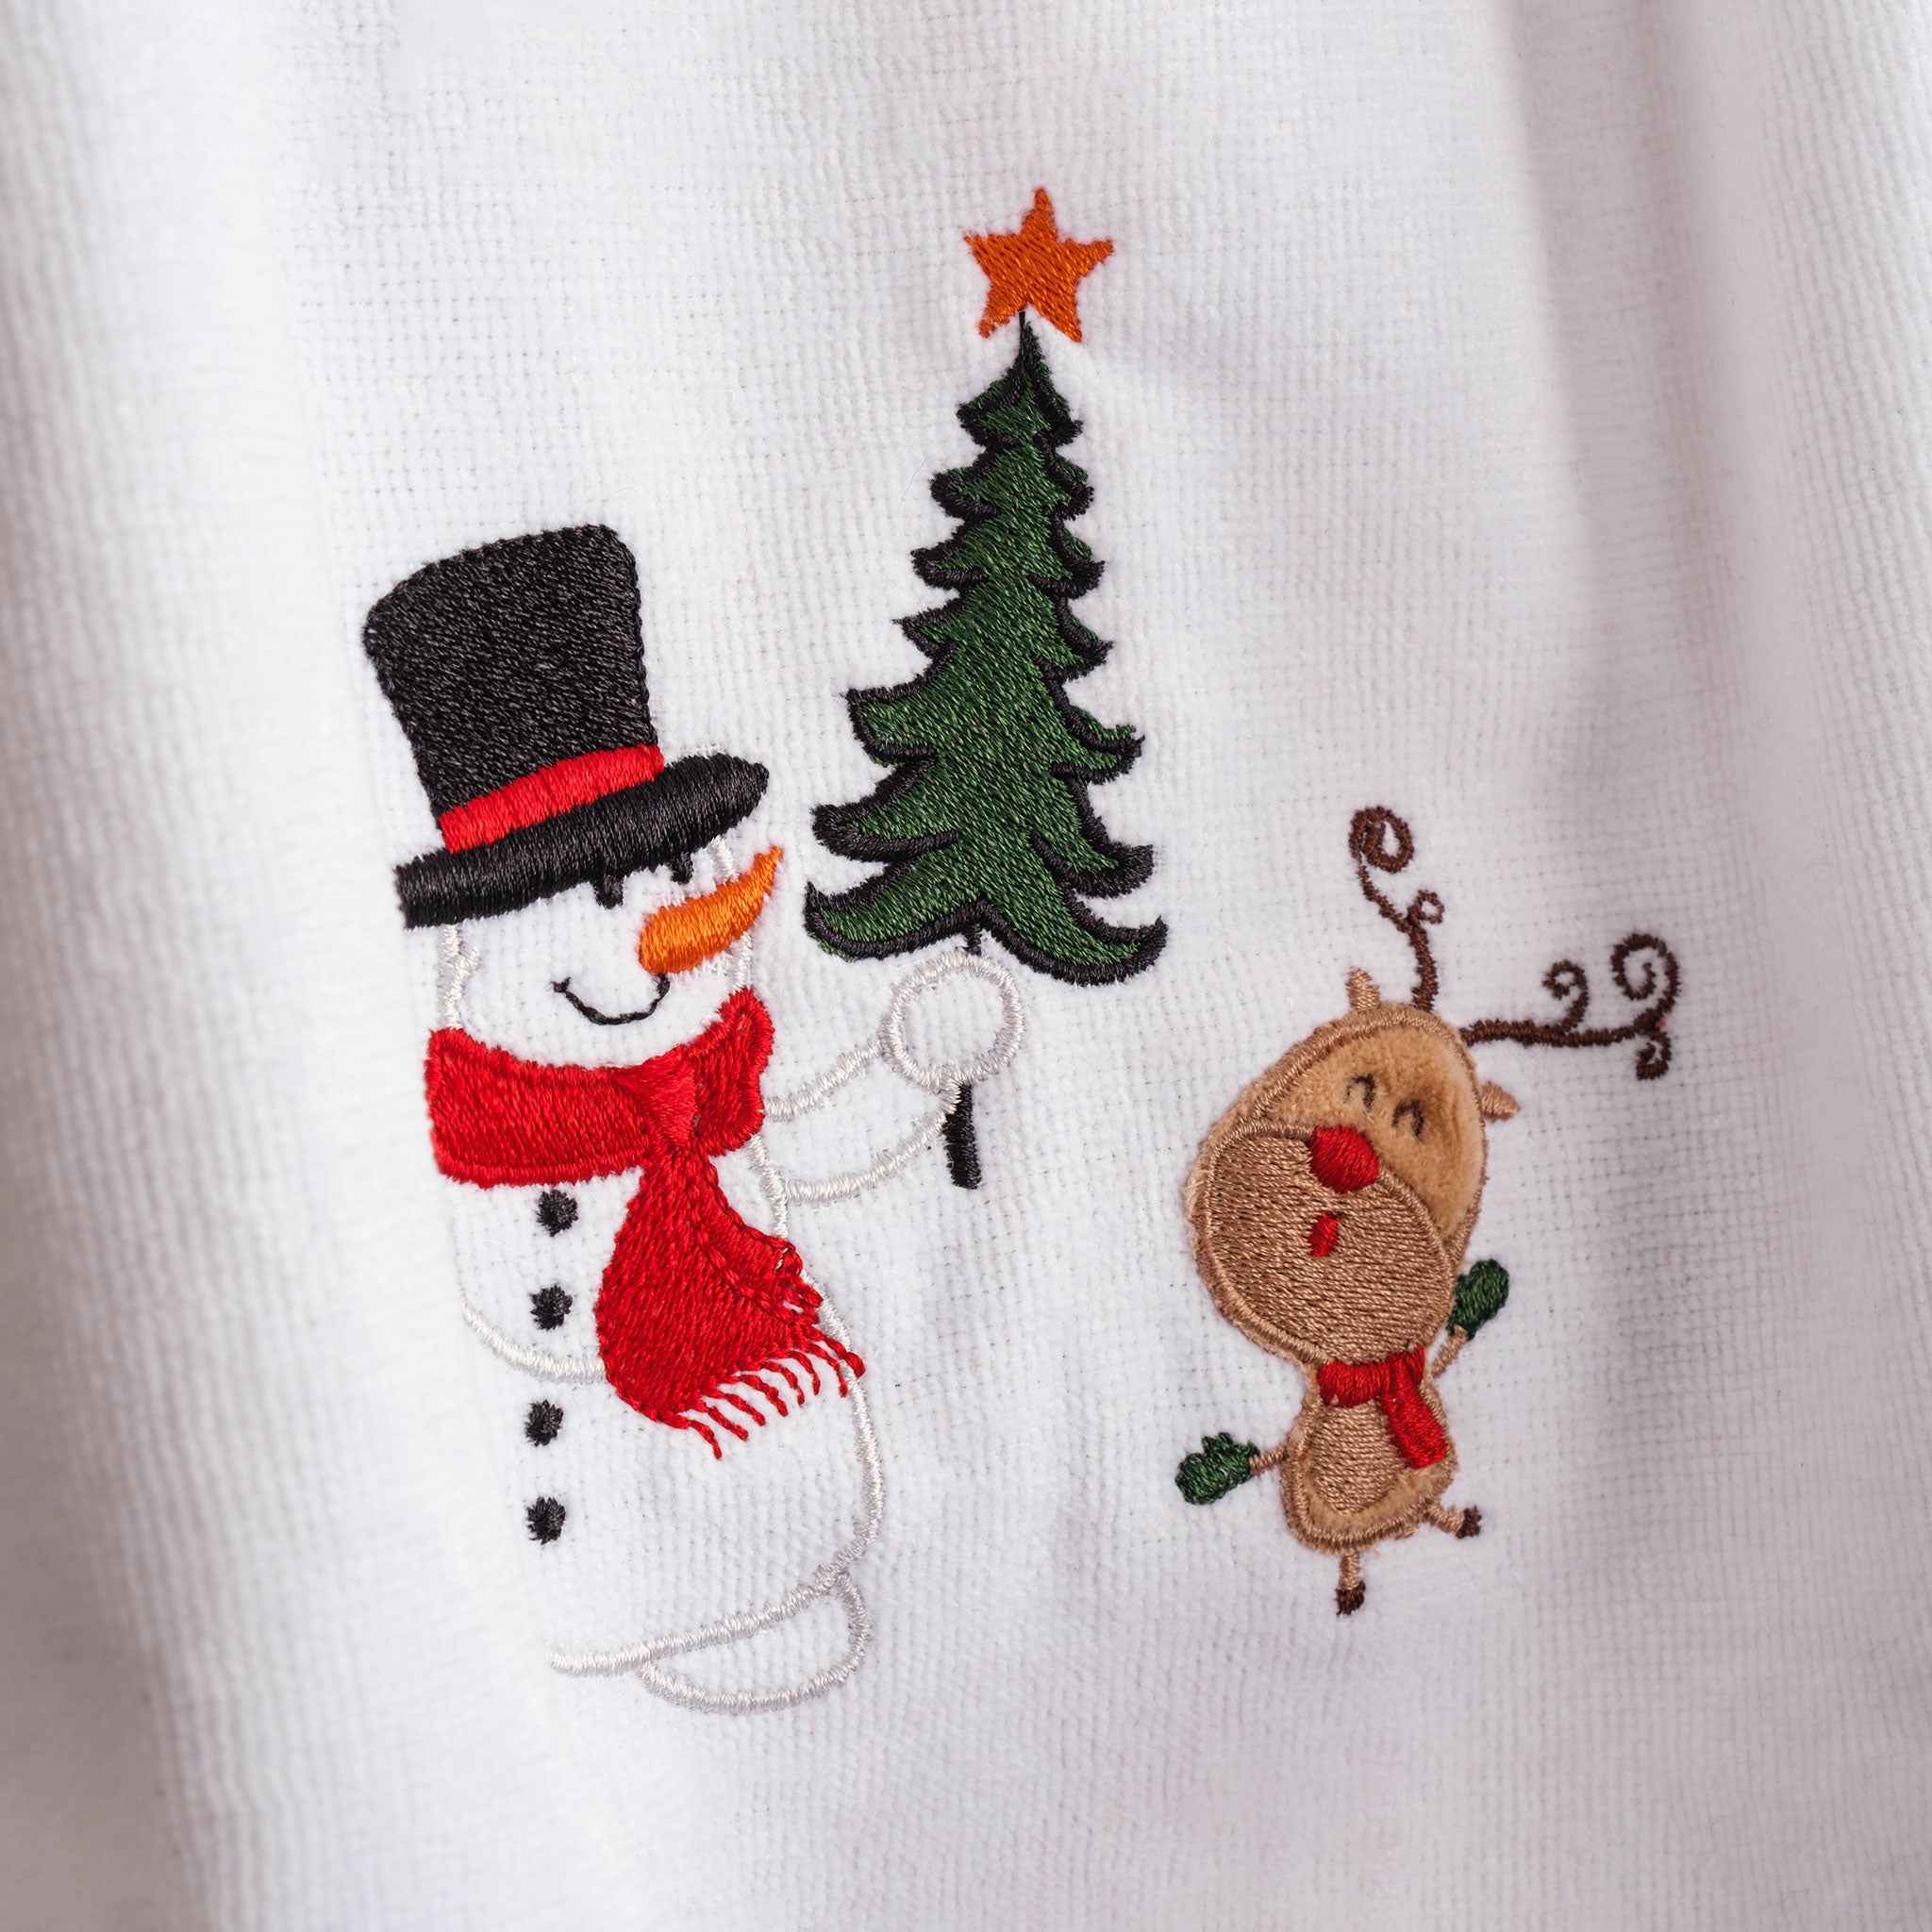 American Soft Linen - Christmas Towels 2 Packed Embroidered Towels for Decor Xmas - Snowmen - 4